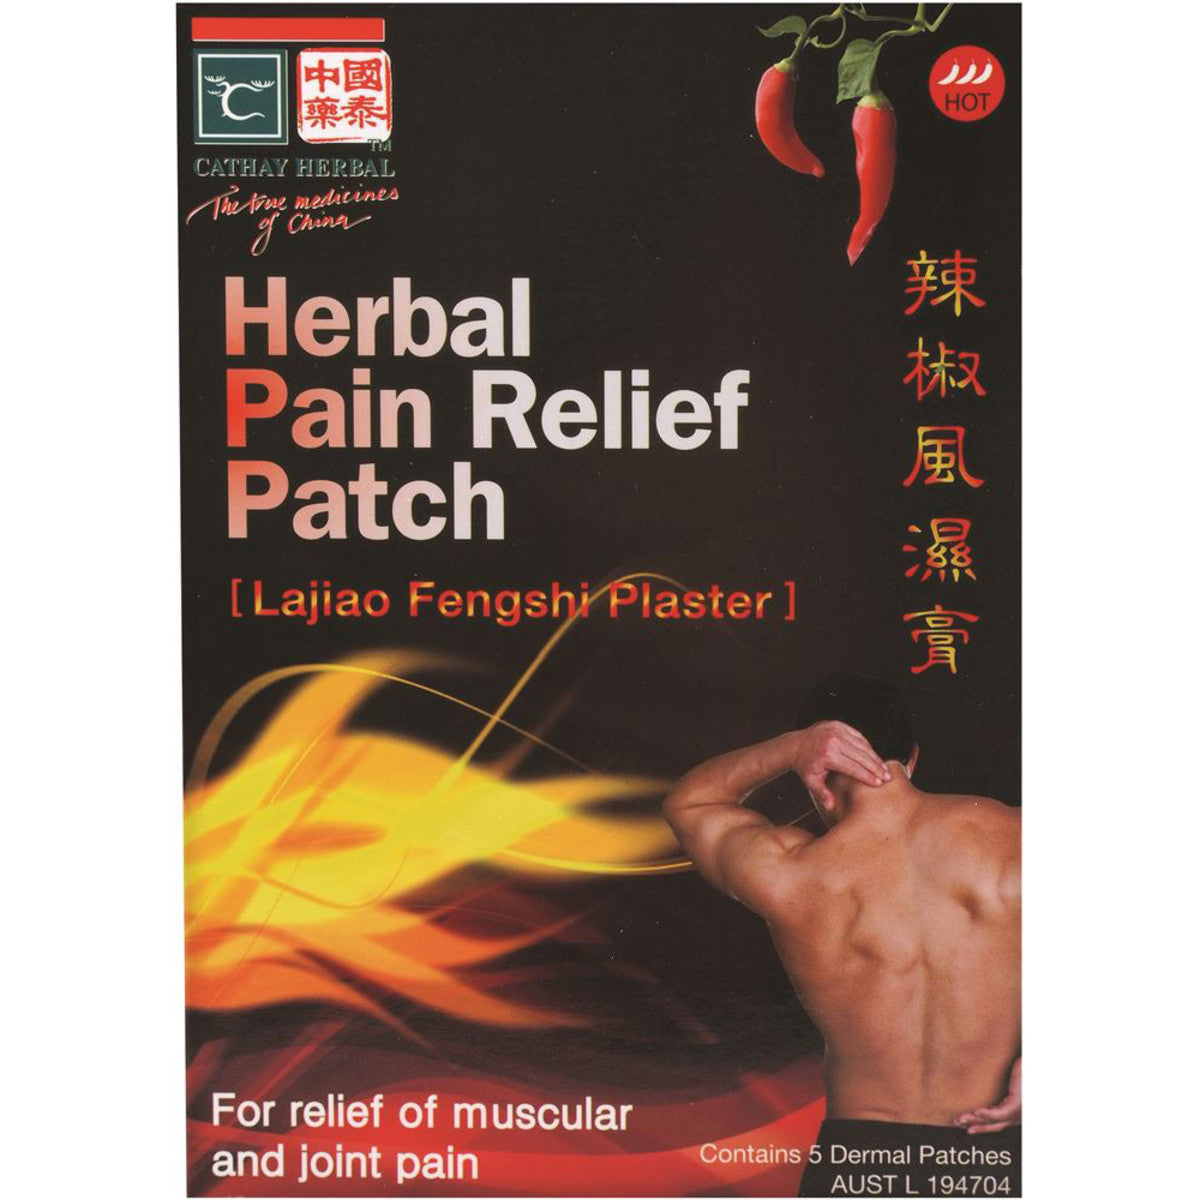 Cathay Herbal - Herbal Pain Relief Patch x 5 Dermal Patches